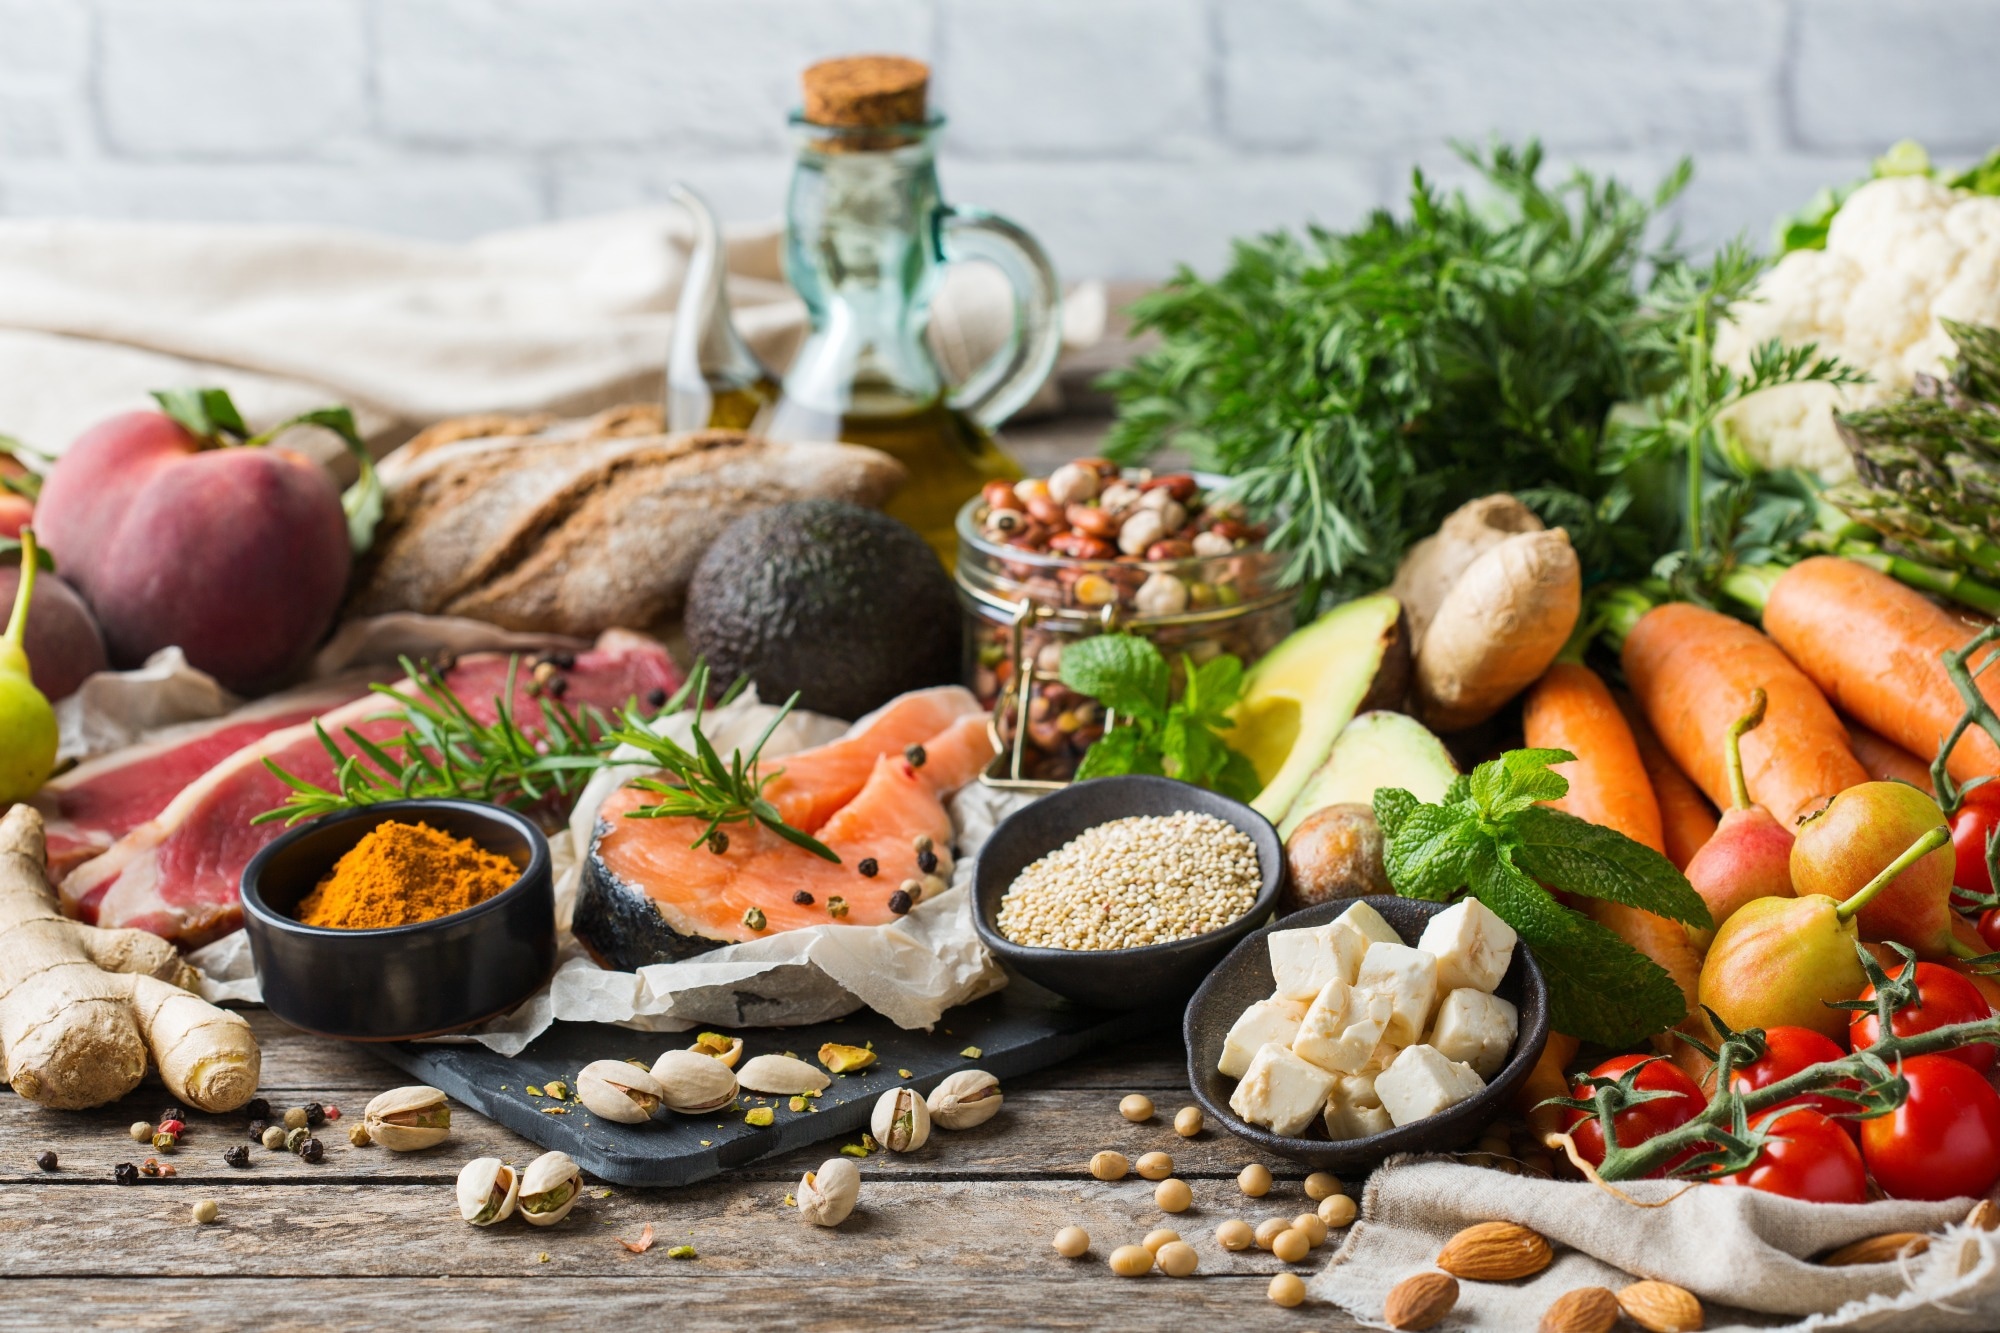 Study: Adherence to a Mediterranean Diet is associated with physical and cognitive health: A cross-sectional analysis of community-dwelling older Australians. Image Credit: Antonina Vlasova/Shutterstock